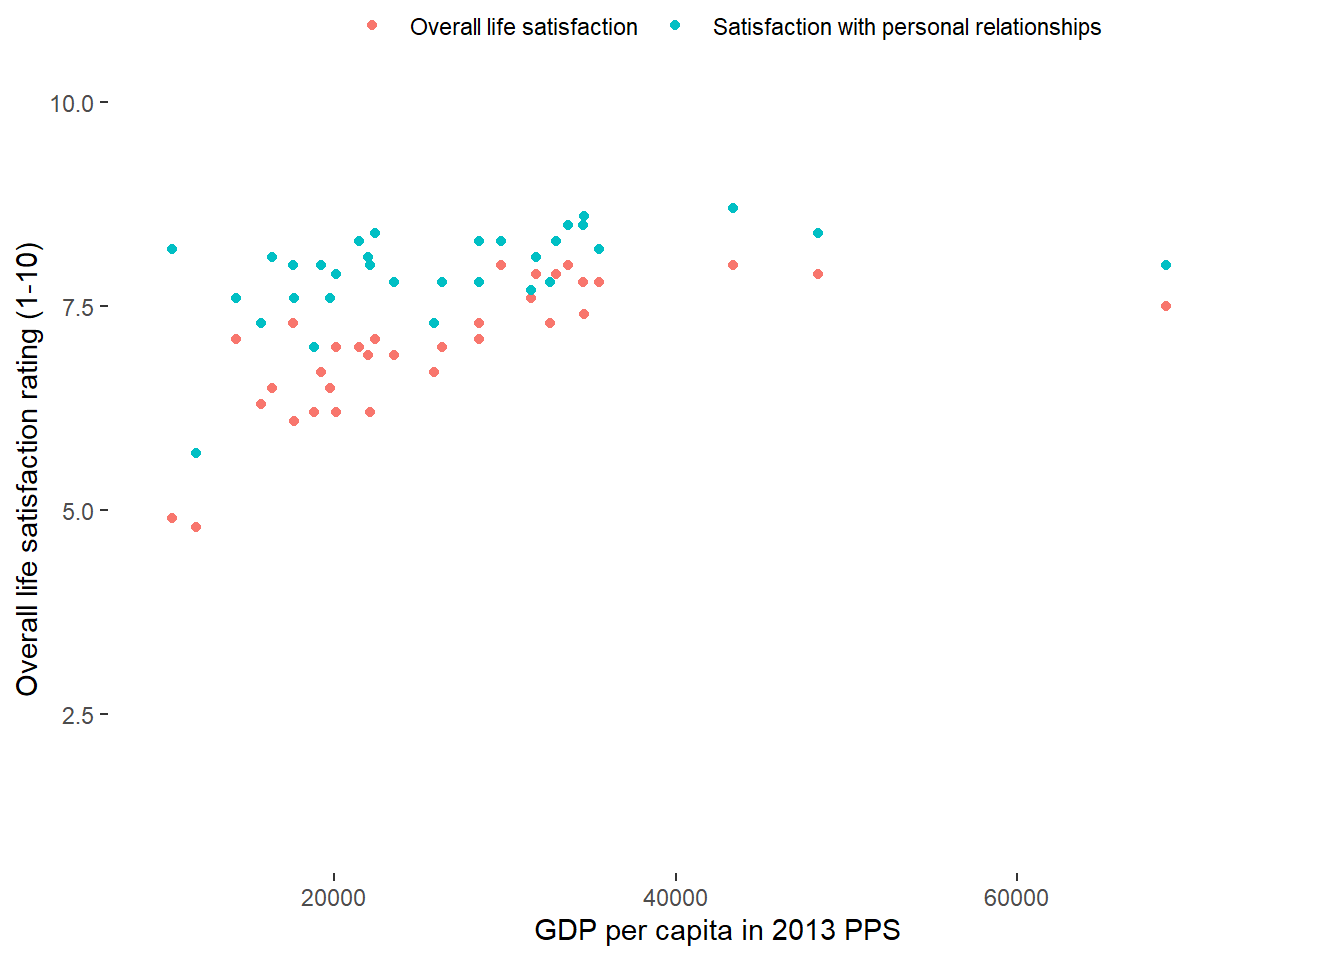 Figure 1: GDP per capita and subjective well-being in 2013. Source: Eurostat